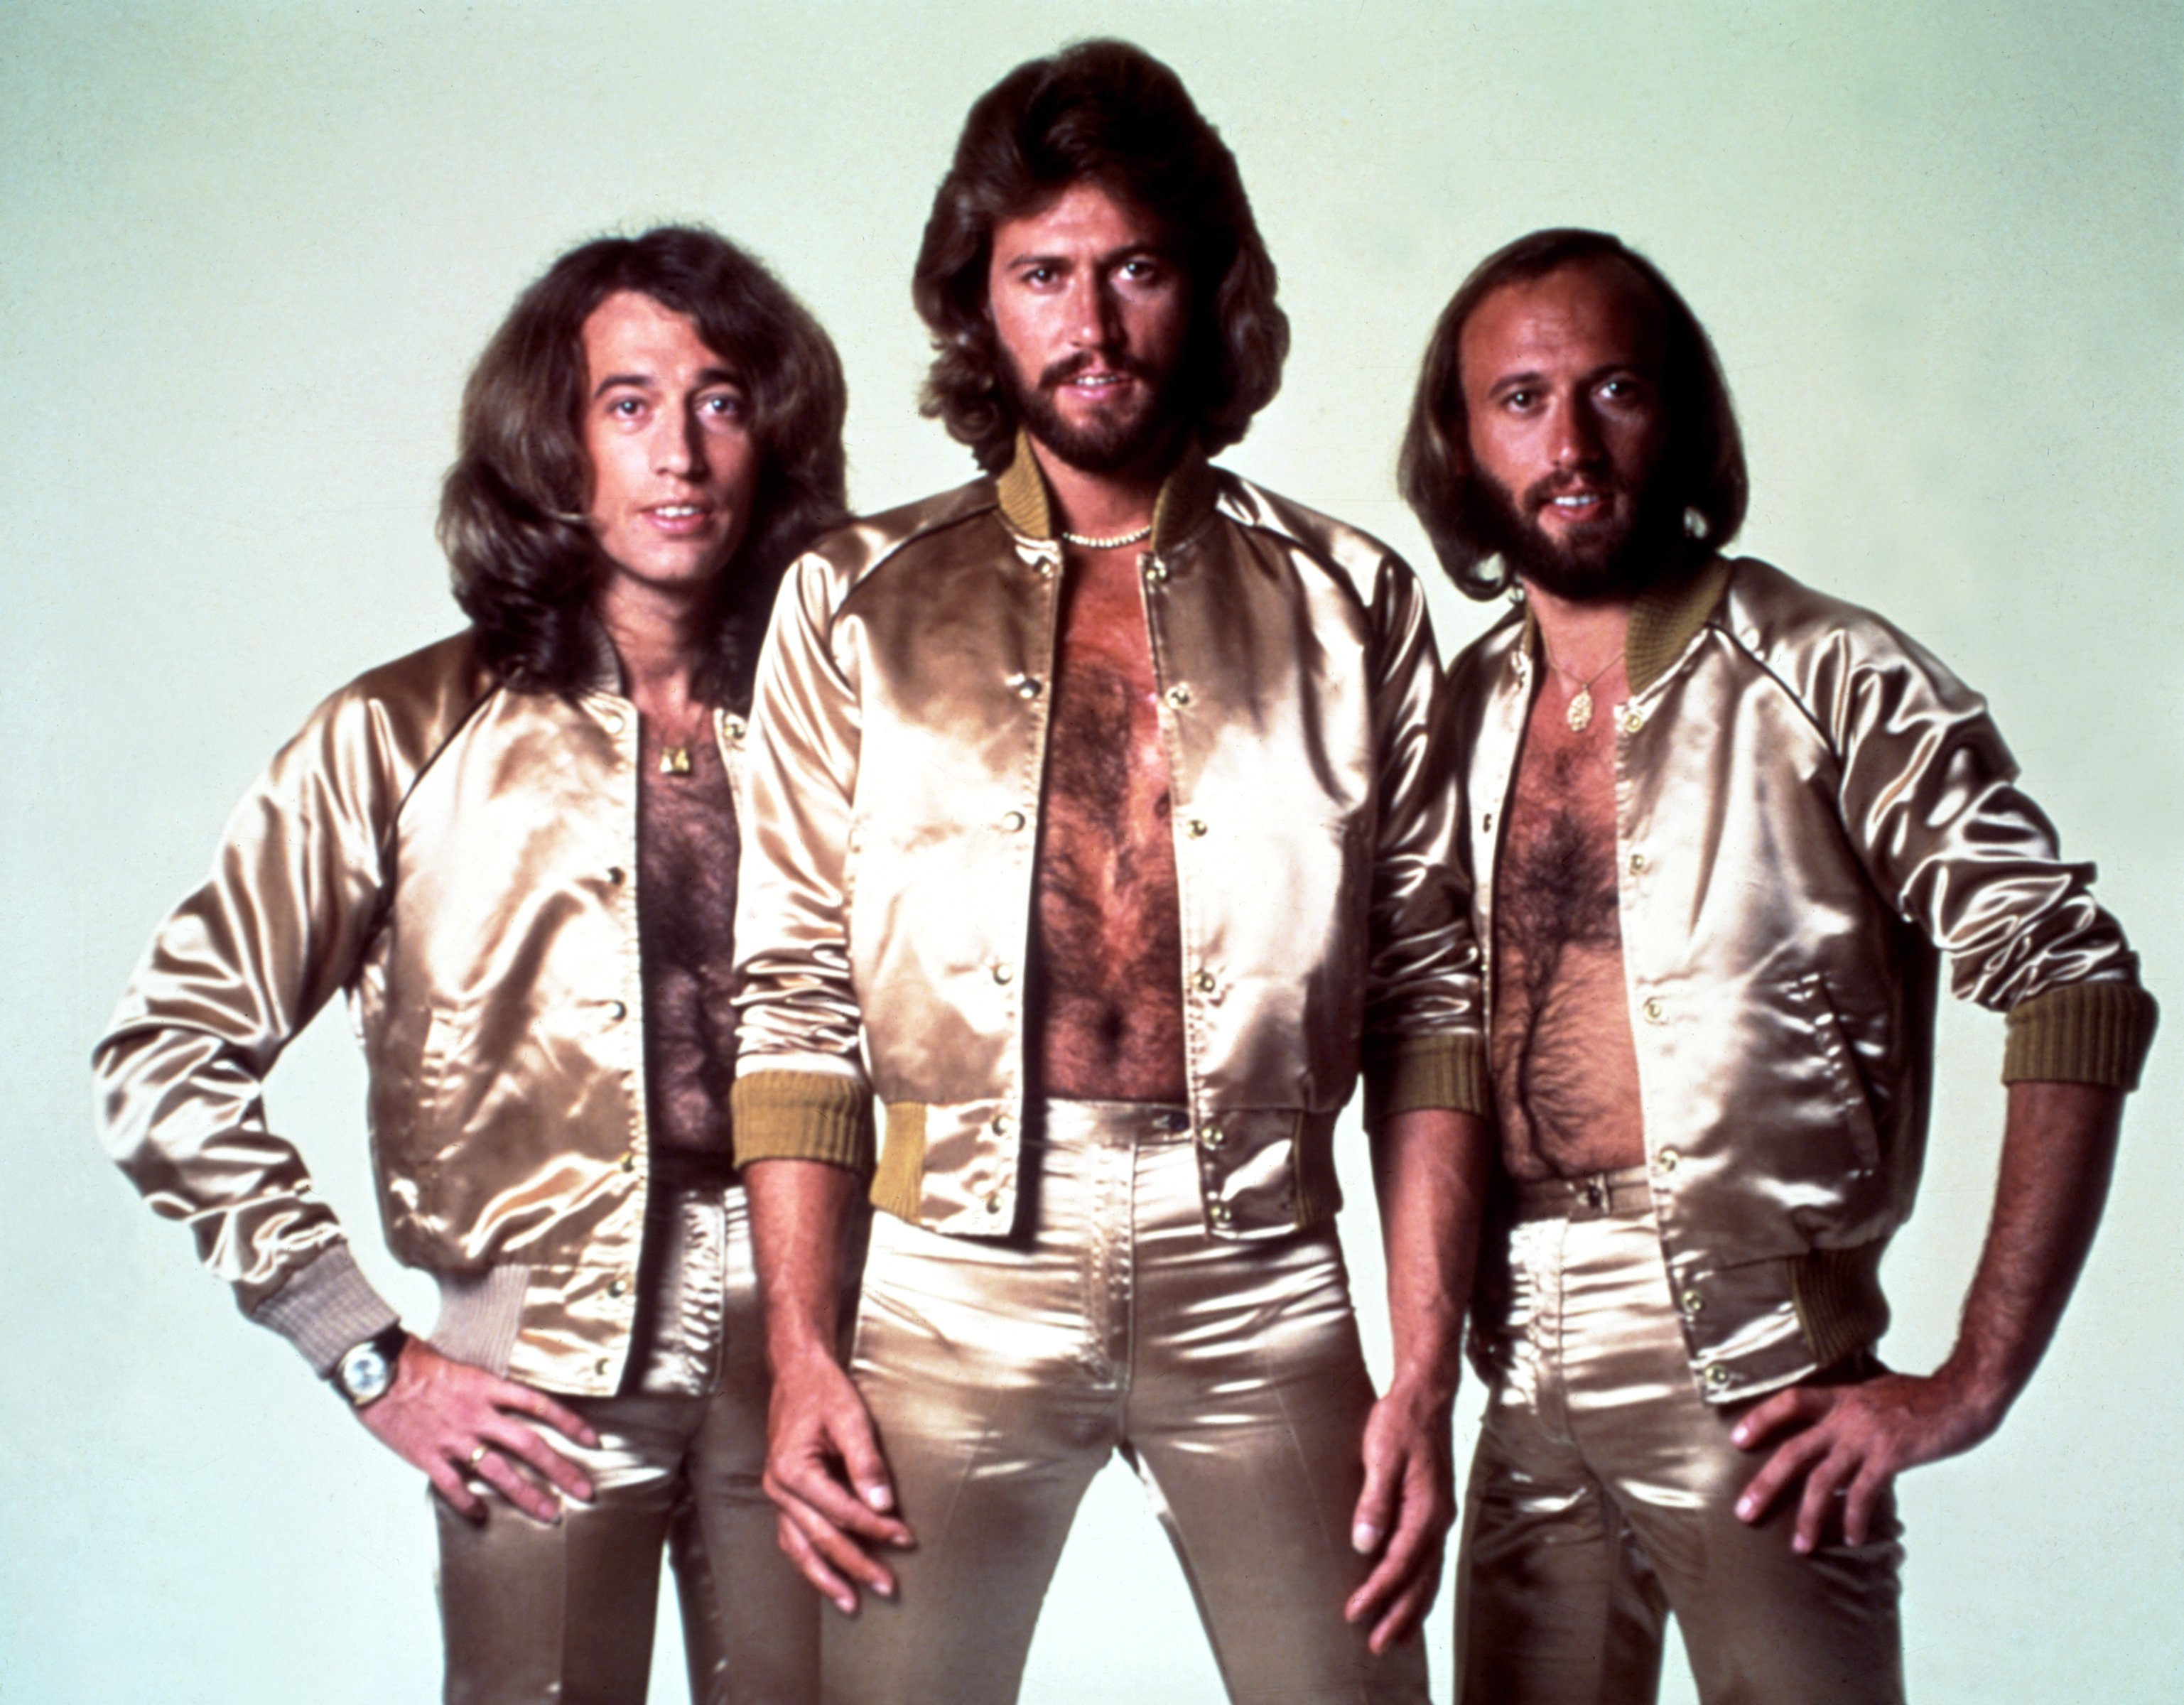 Disco group the Bee Gees pose for a portrait in gold lame outfits in 1977 | Source: Getty Images